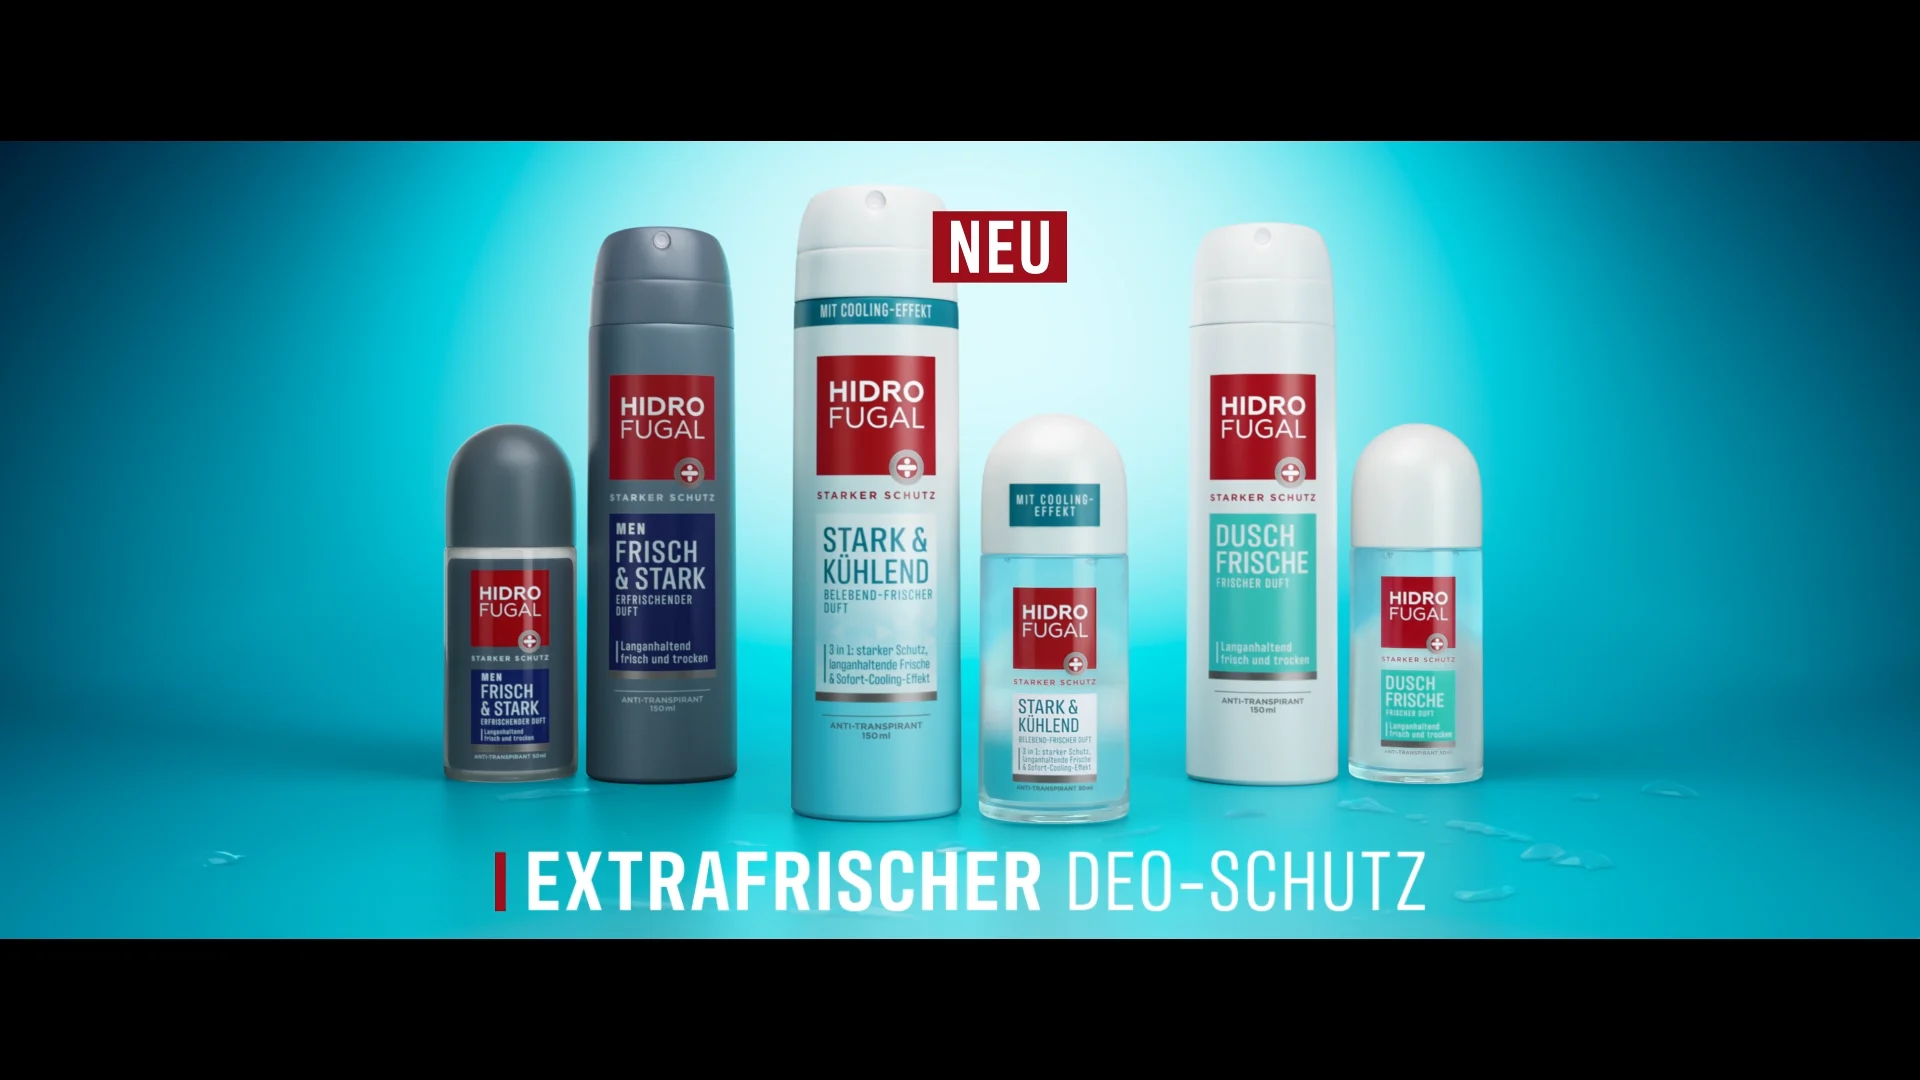 hidrofugal packshot consiting out of a woman aerosol and roll-on on the right side as well as in the middle and a men aerosol and roll-on on the left side. all in an undefined blue room in front of a white backlight